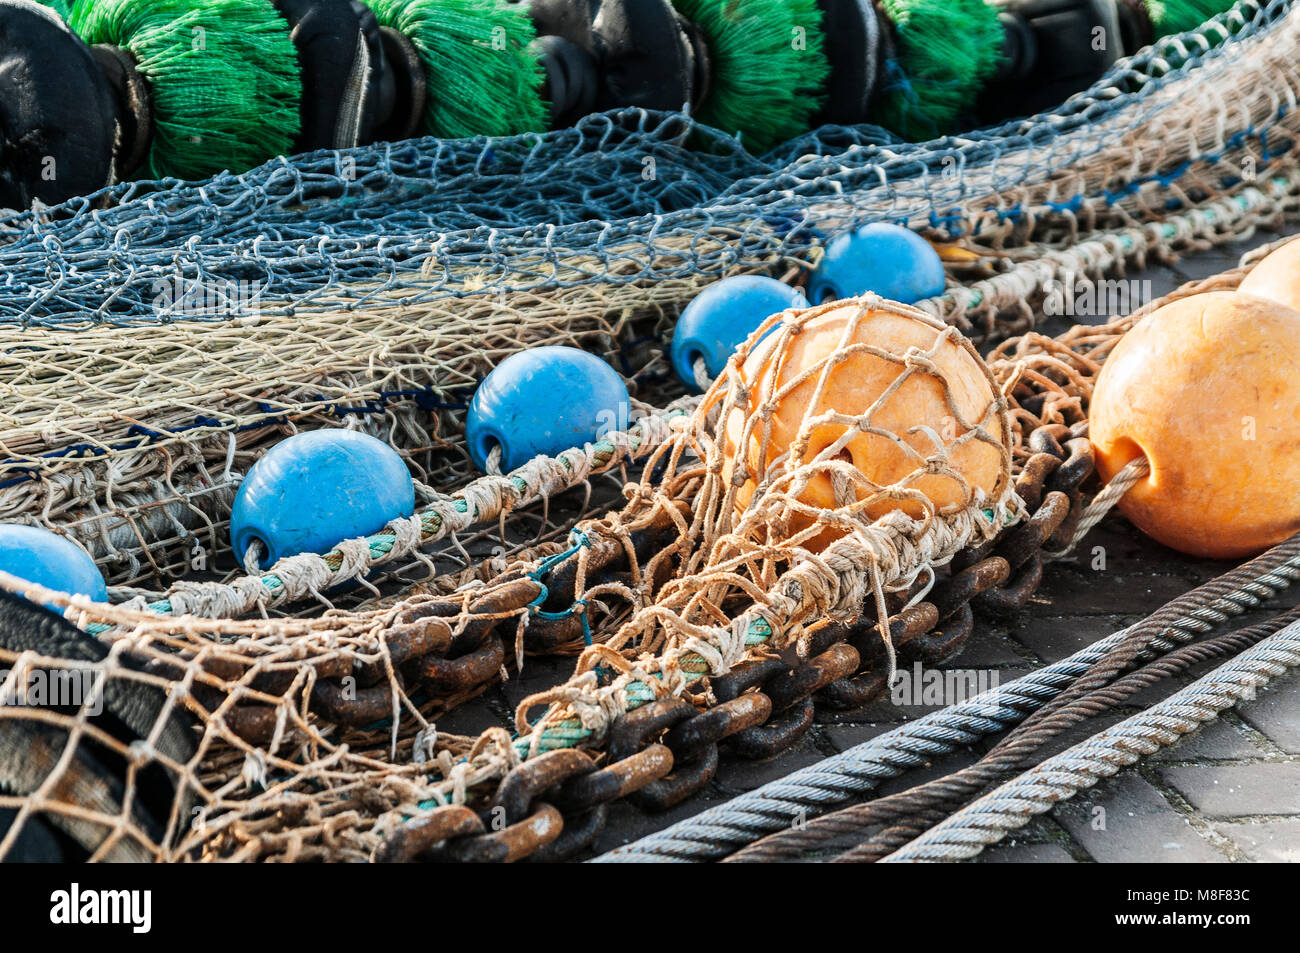 fishing nets spread out on the quay Stock Photo